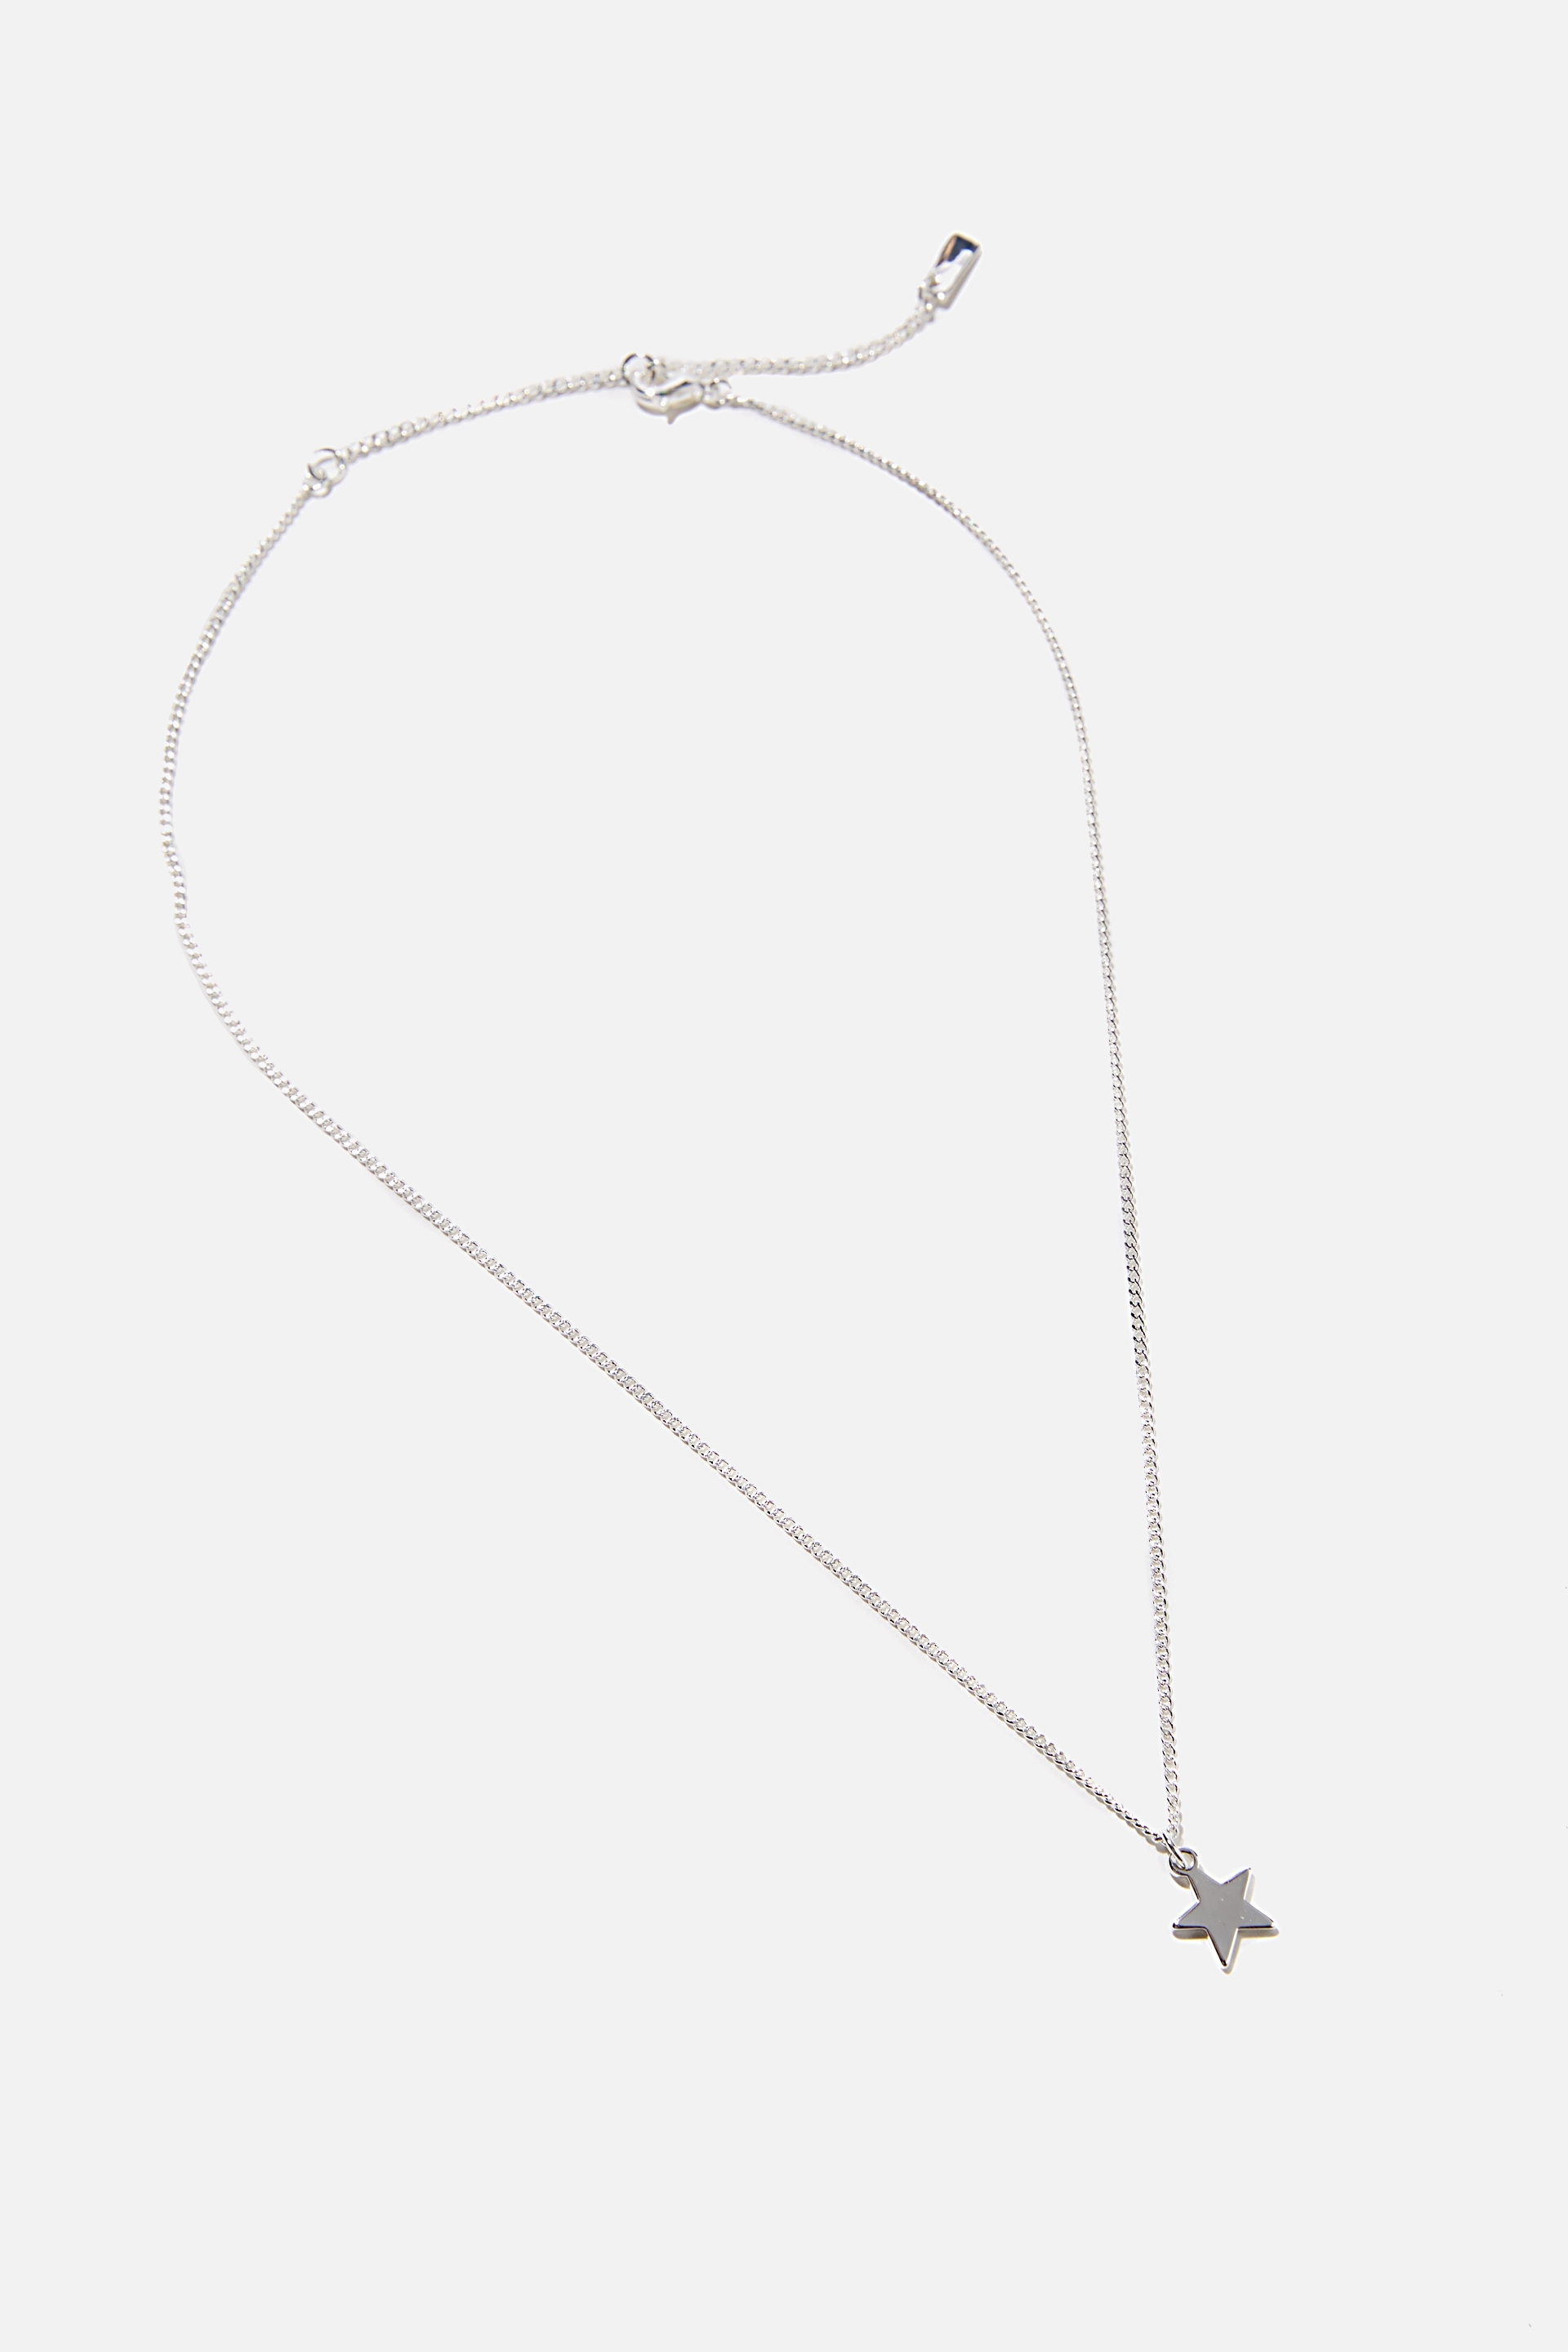 Rubi - Premium Pendant Necklace - Sterling silver plated star